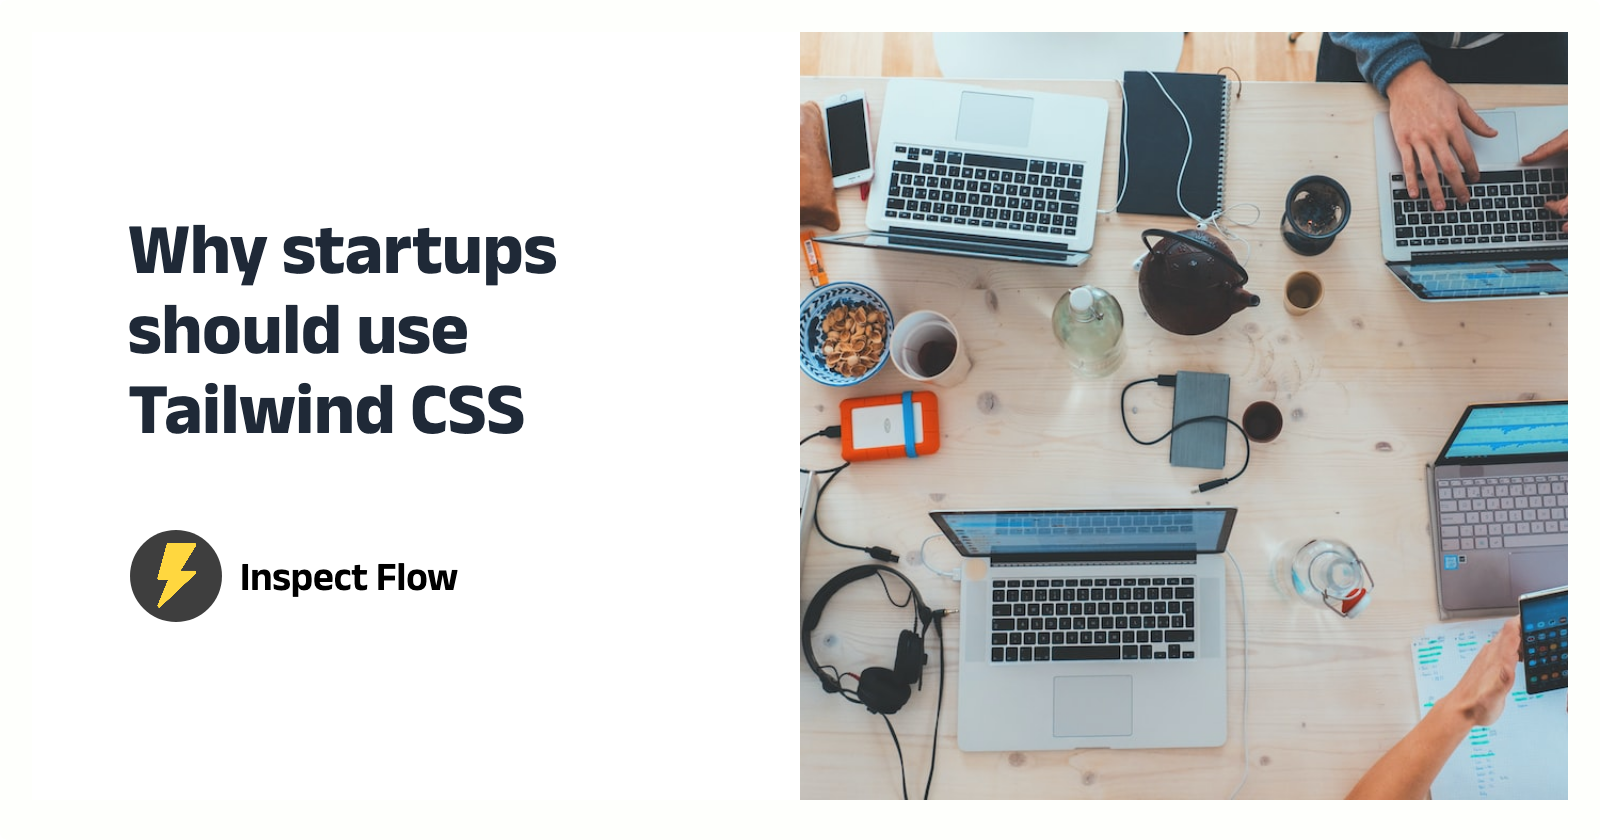 Why startups should use Tailwind CSS